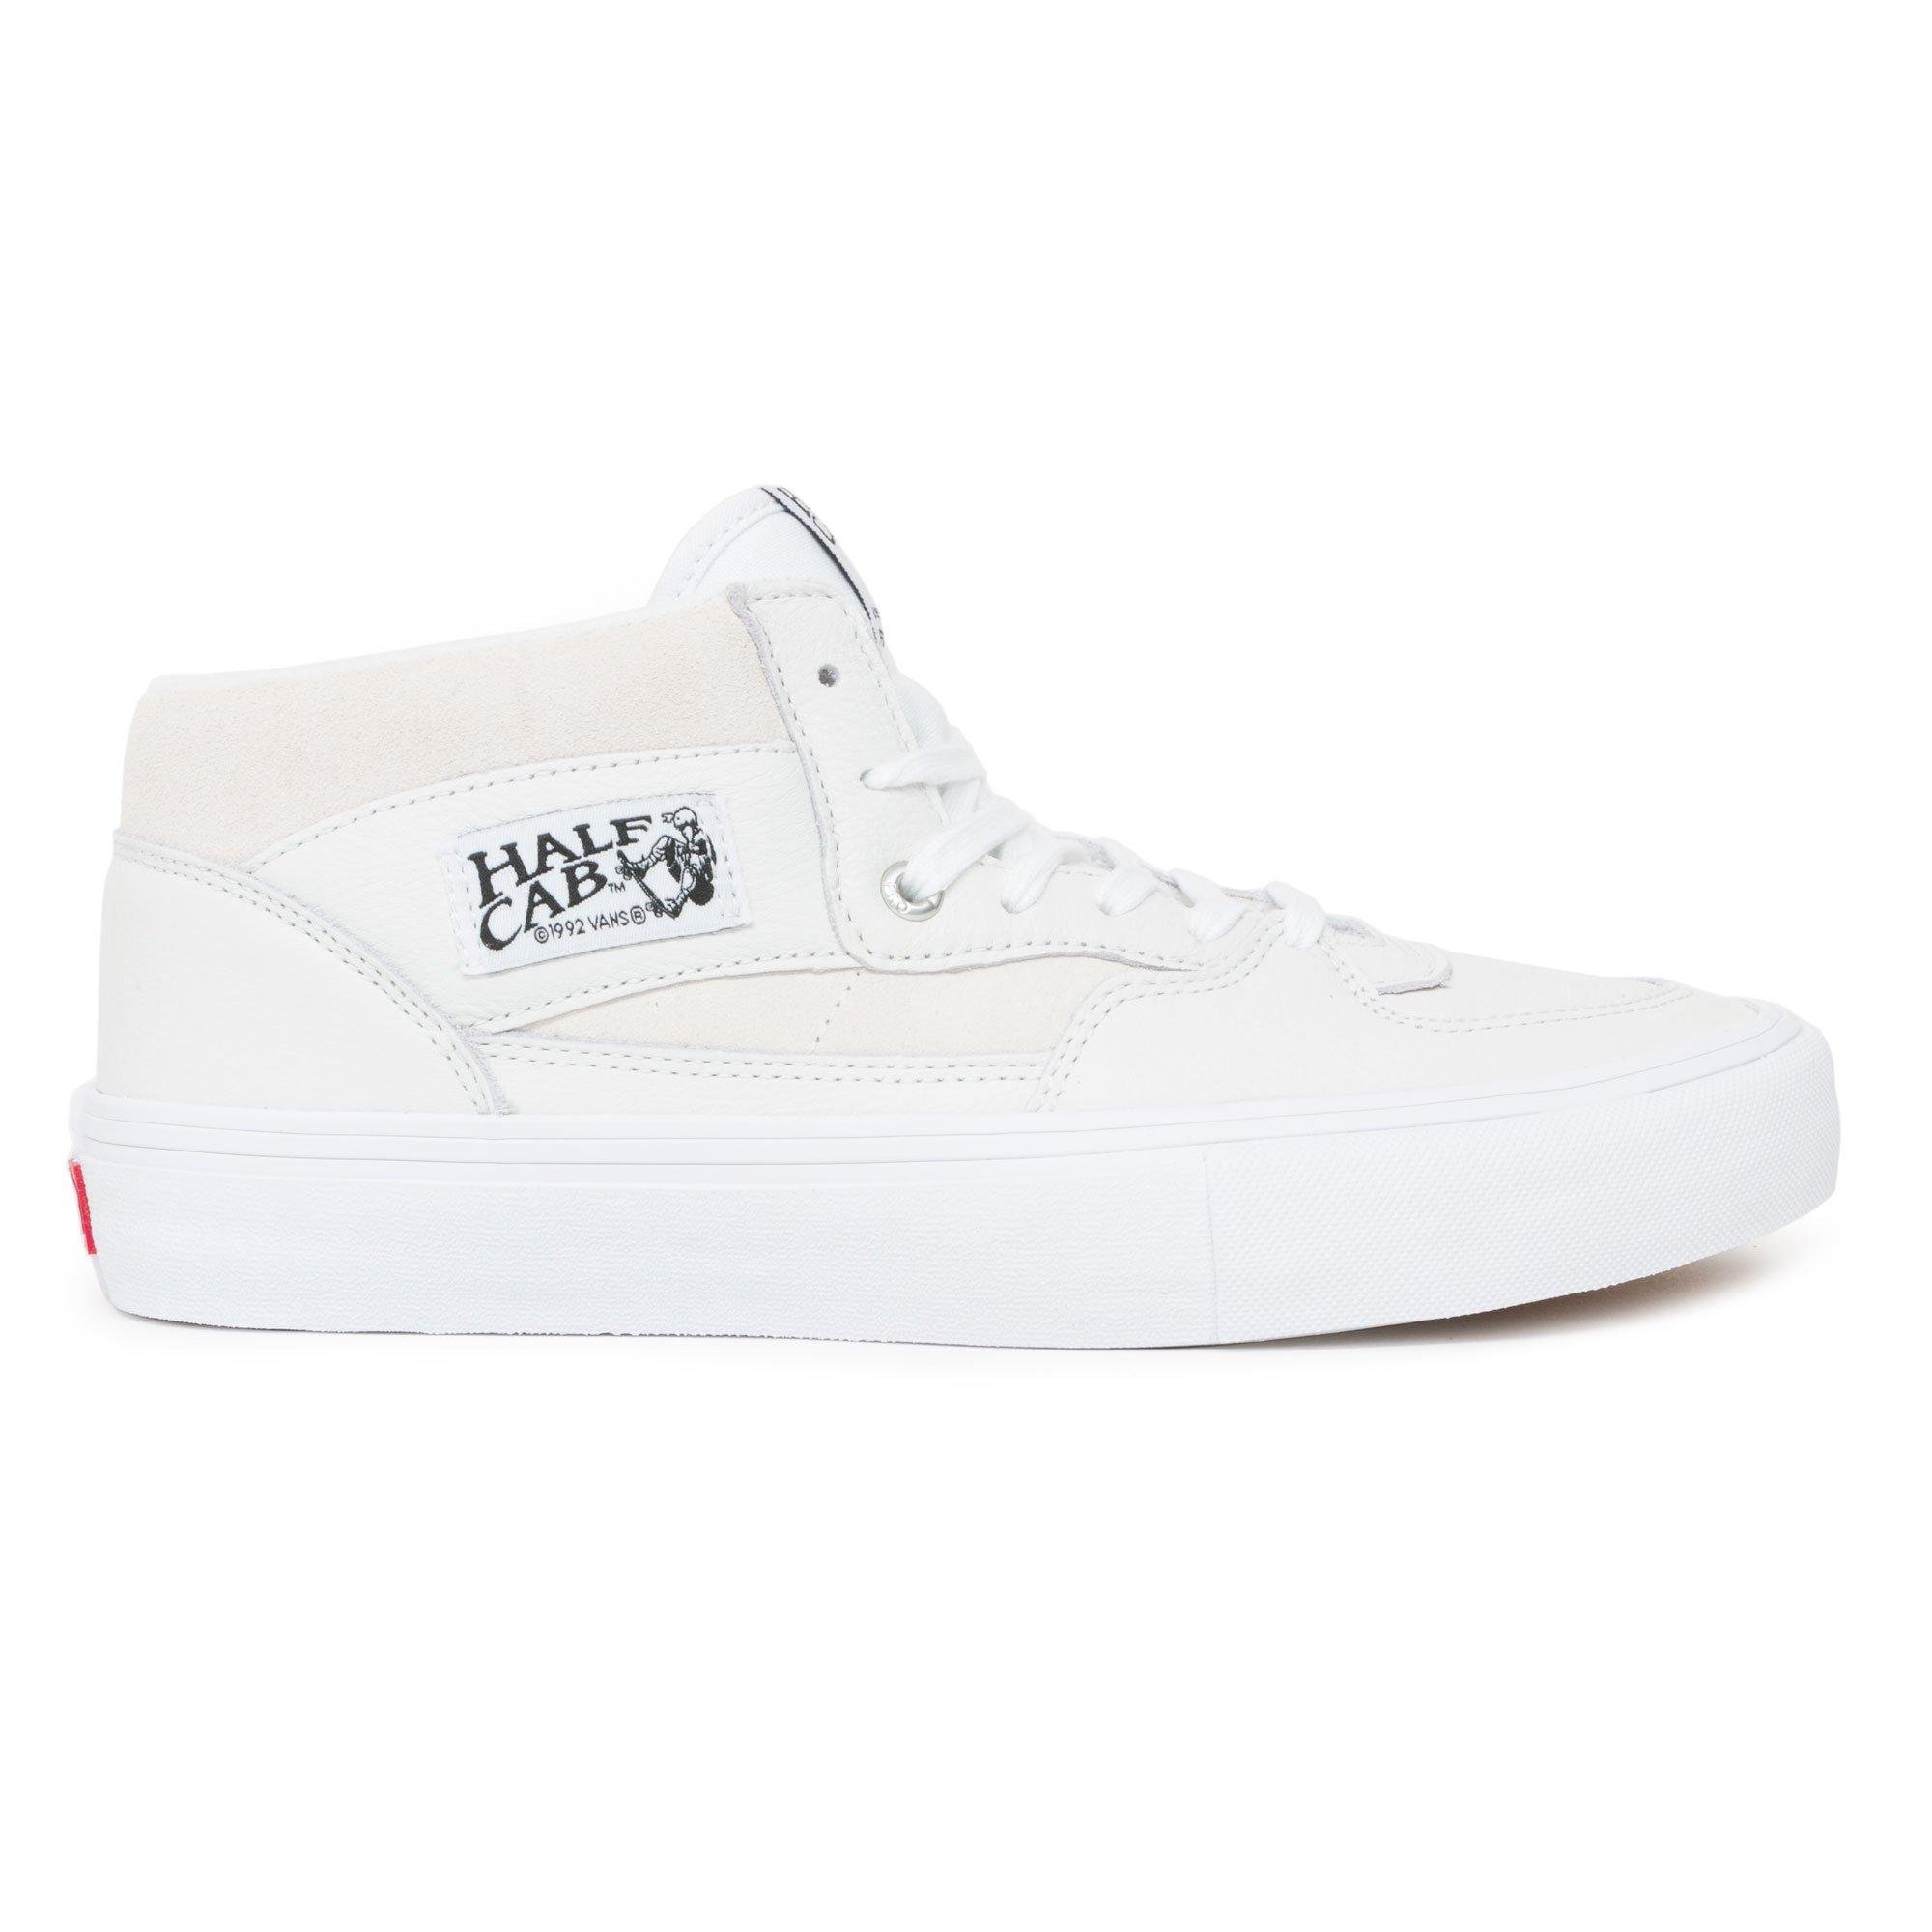 symptom anklageren Patronise Vans Half Cab Pro Leather Shoes in White for Men - Lyst